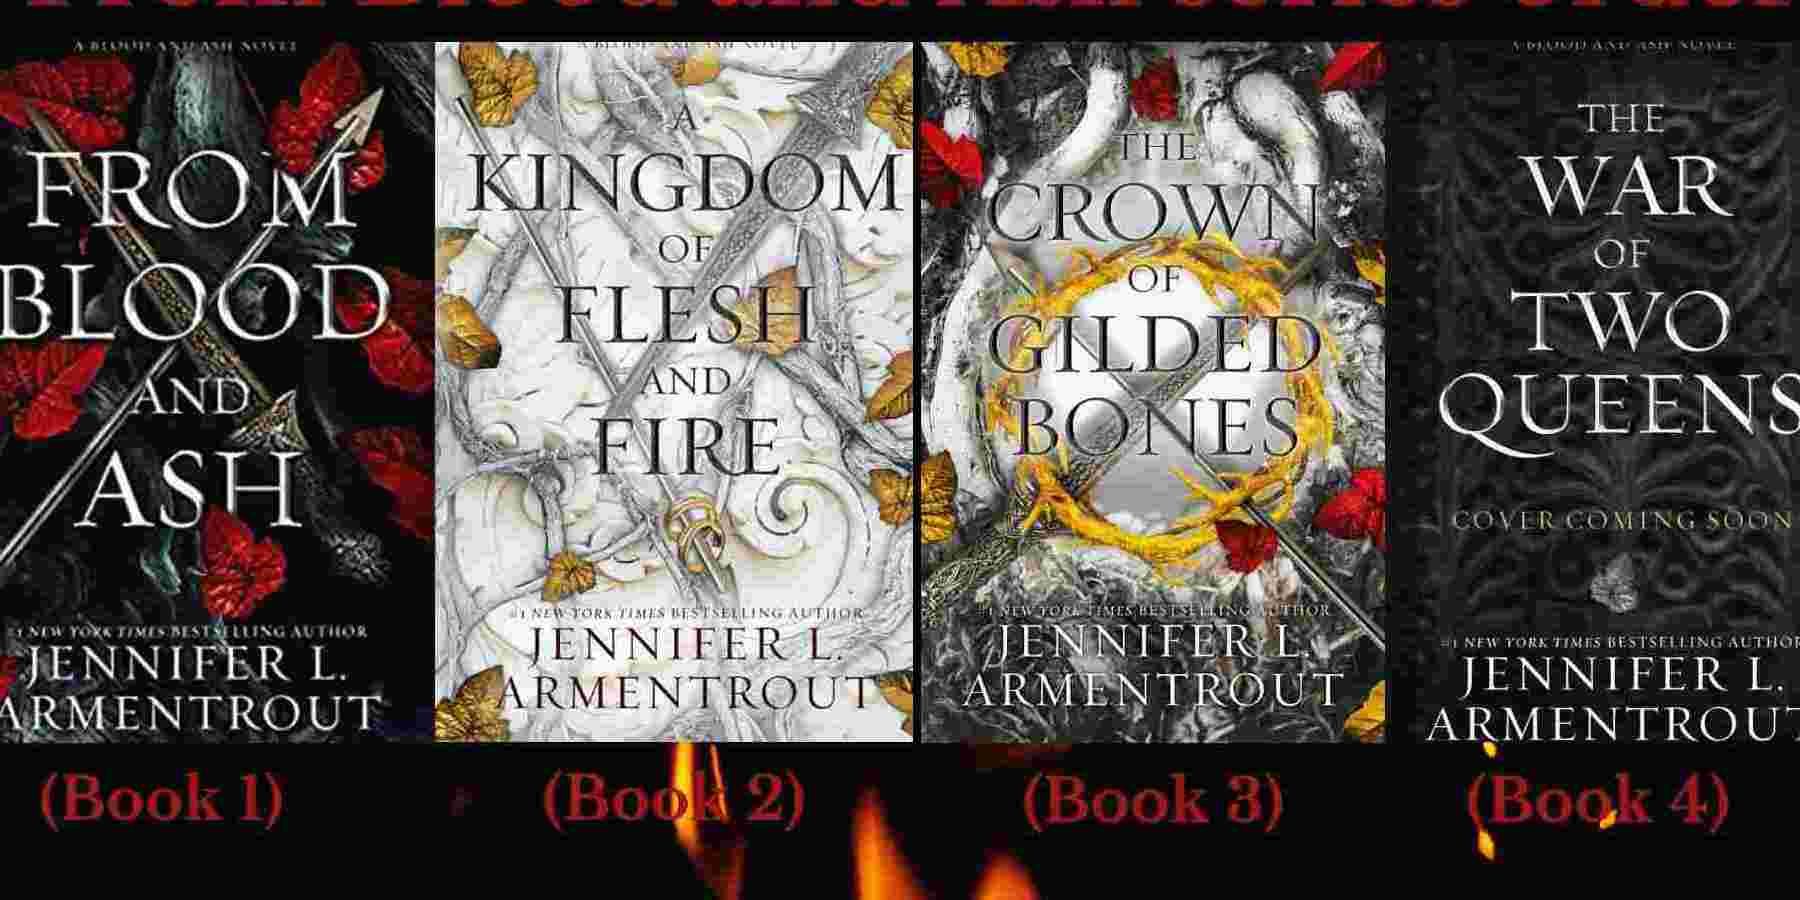 The book covers from the Blood and Ash series.